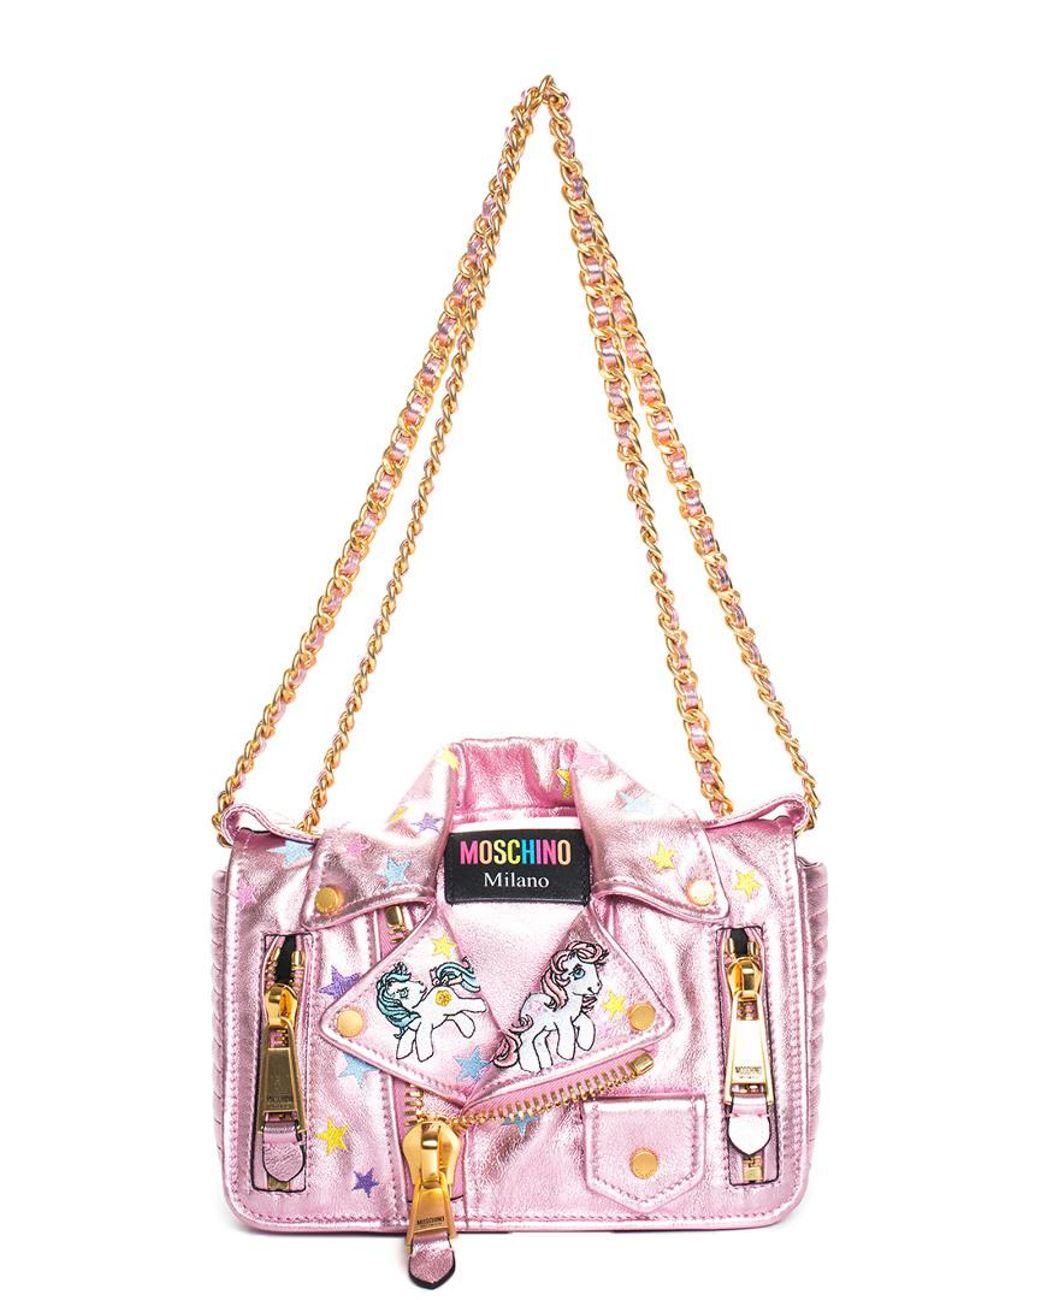 Moschino Limited Edition 2018 Pink Metallic Leather My Little Pony ...